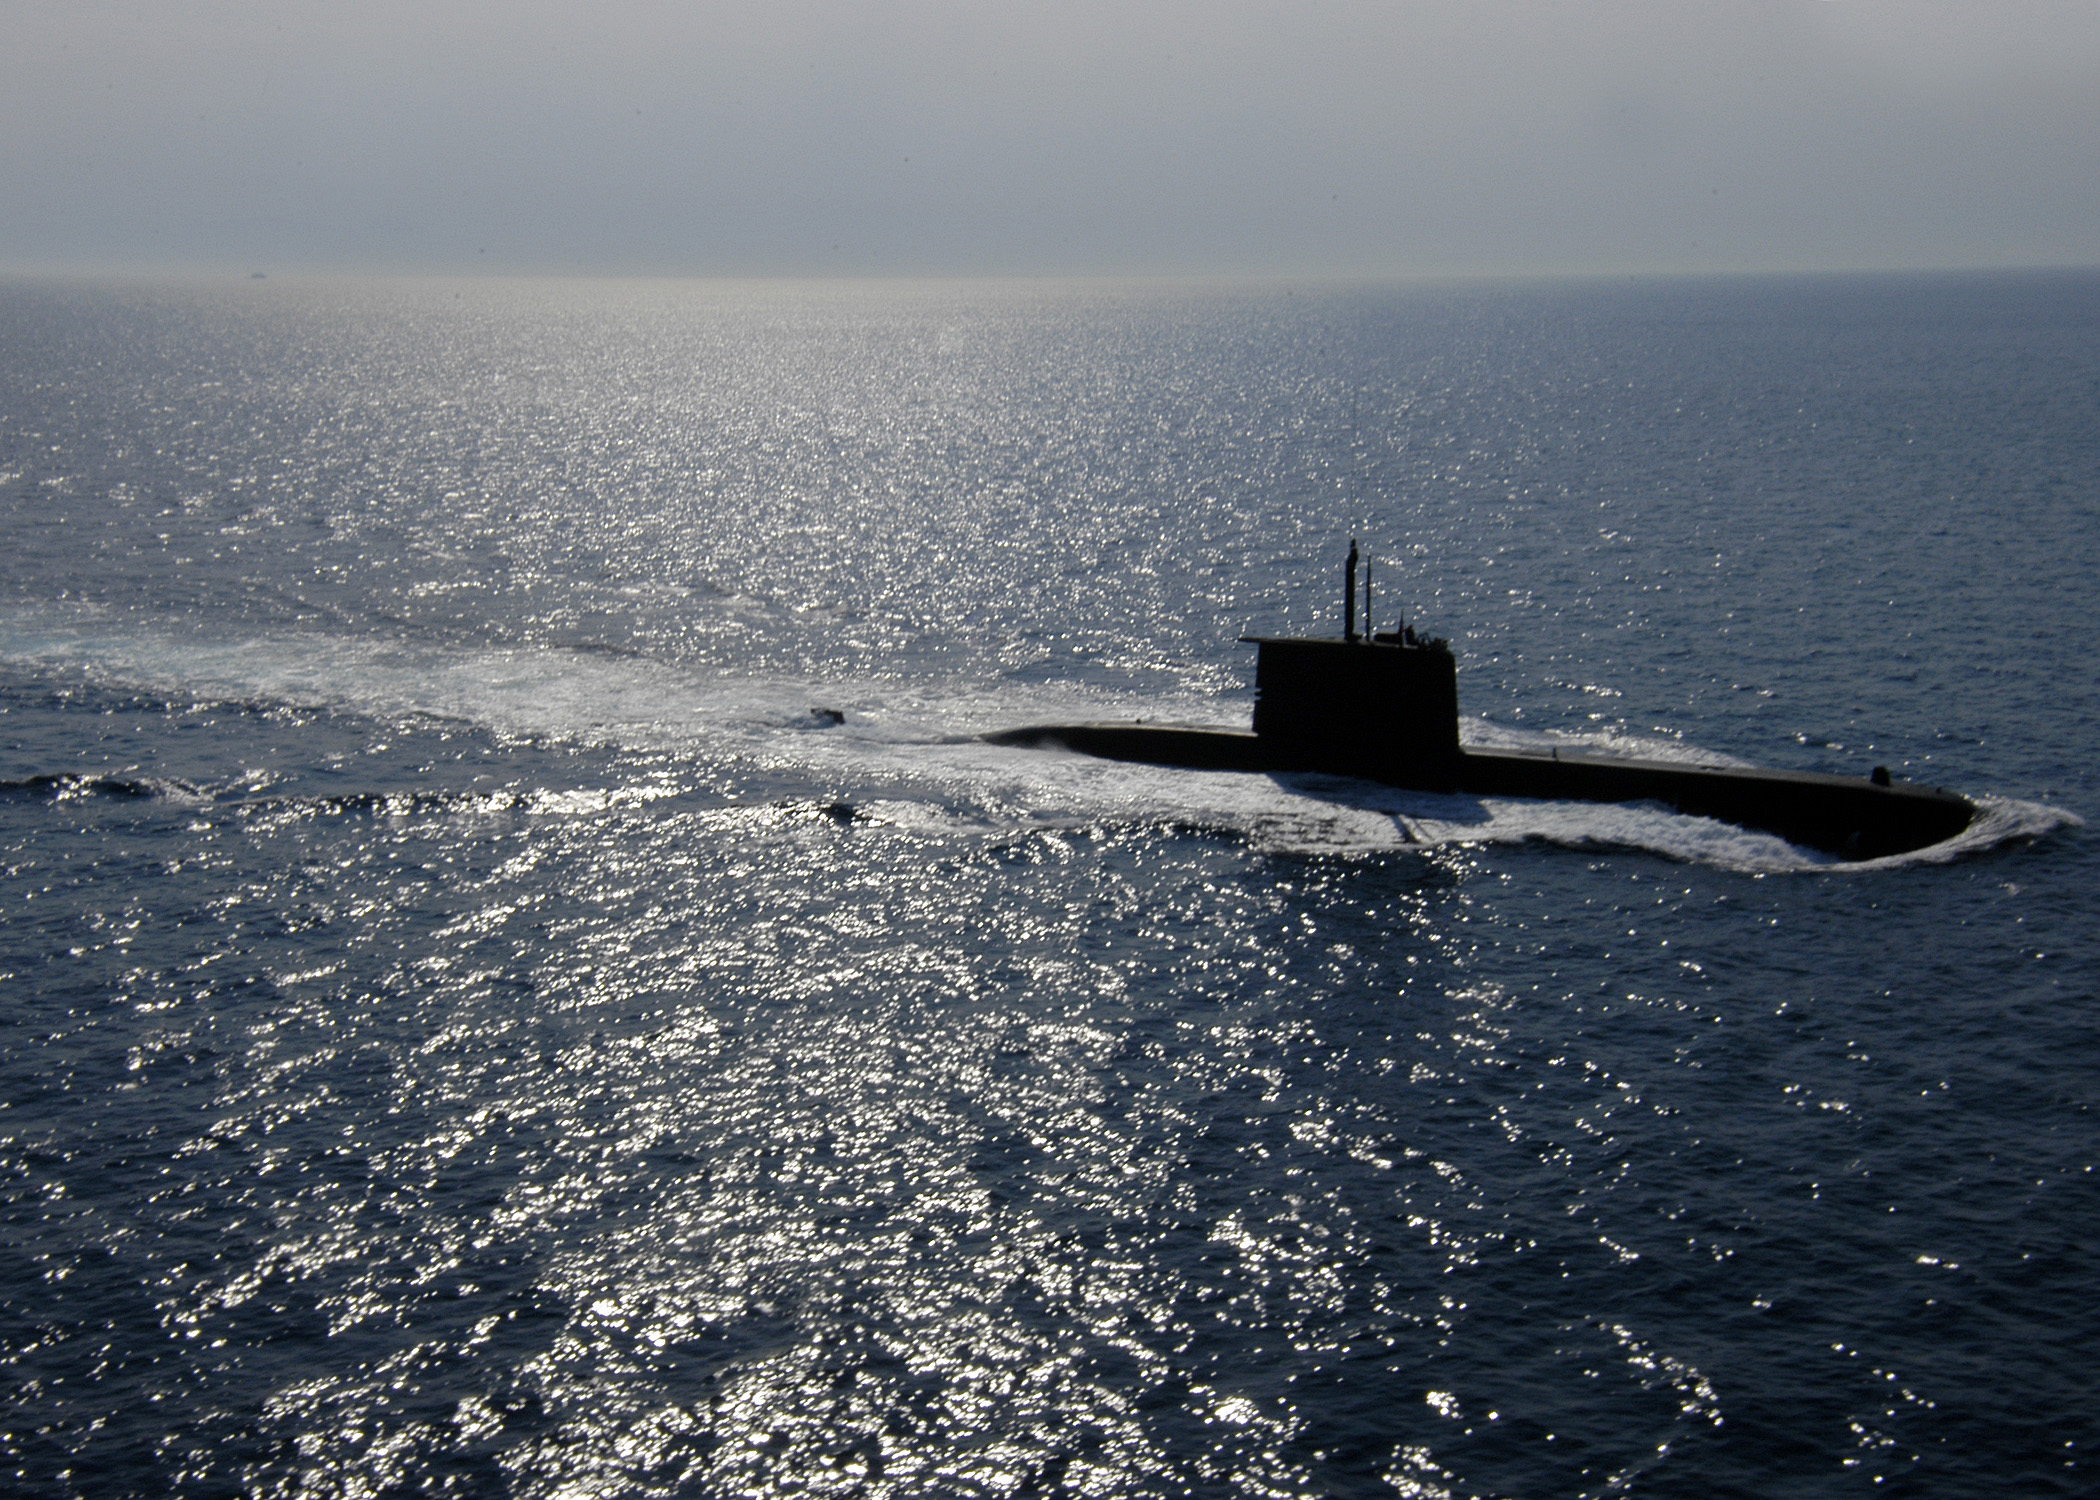 US_Navy_050624-N-1464F-025_The_Turkish_submarine_Preveze_surfaces_following_the_North_Atlantic_Treaty_Organization_%28NATO%29_submarine_escape_and_rescue_exercise_Sorbet_Royal_2005.jpg